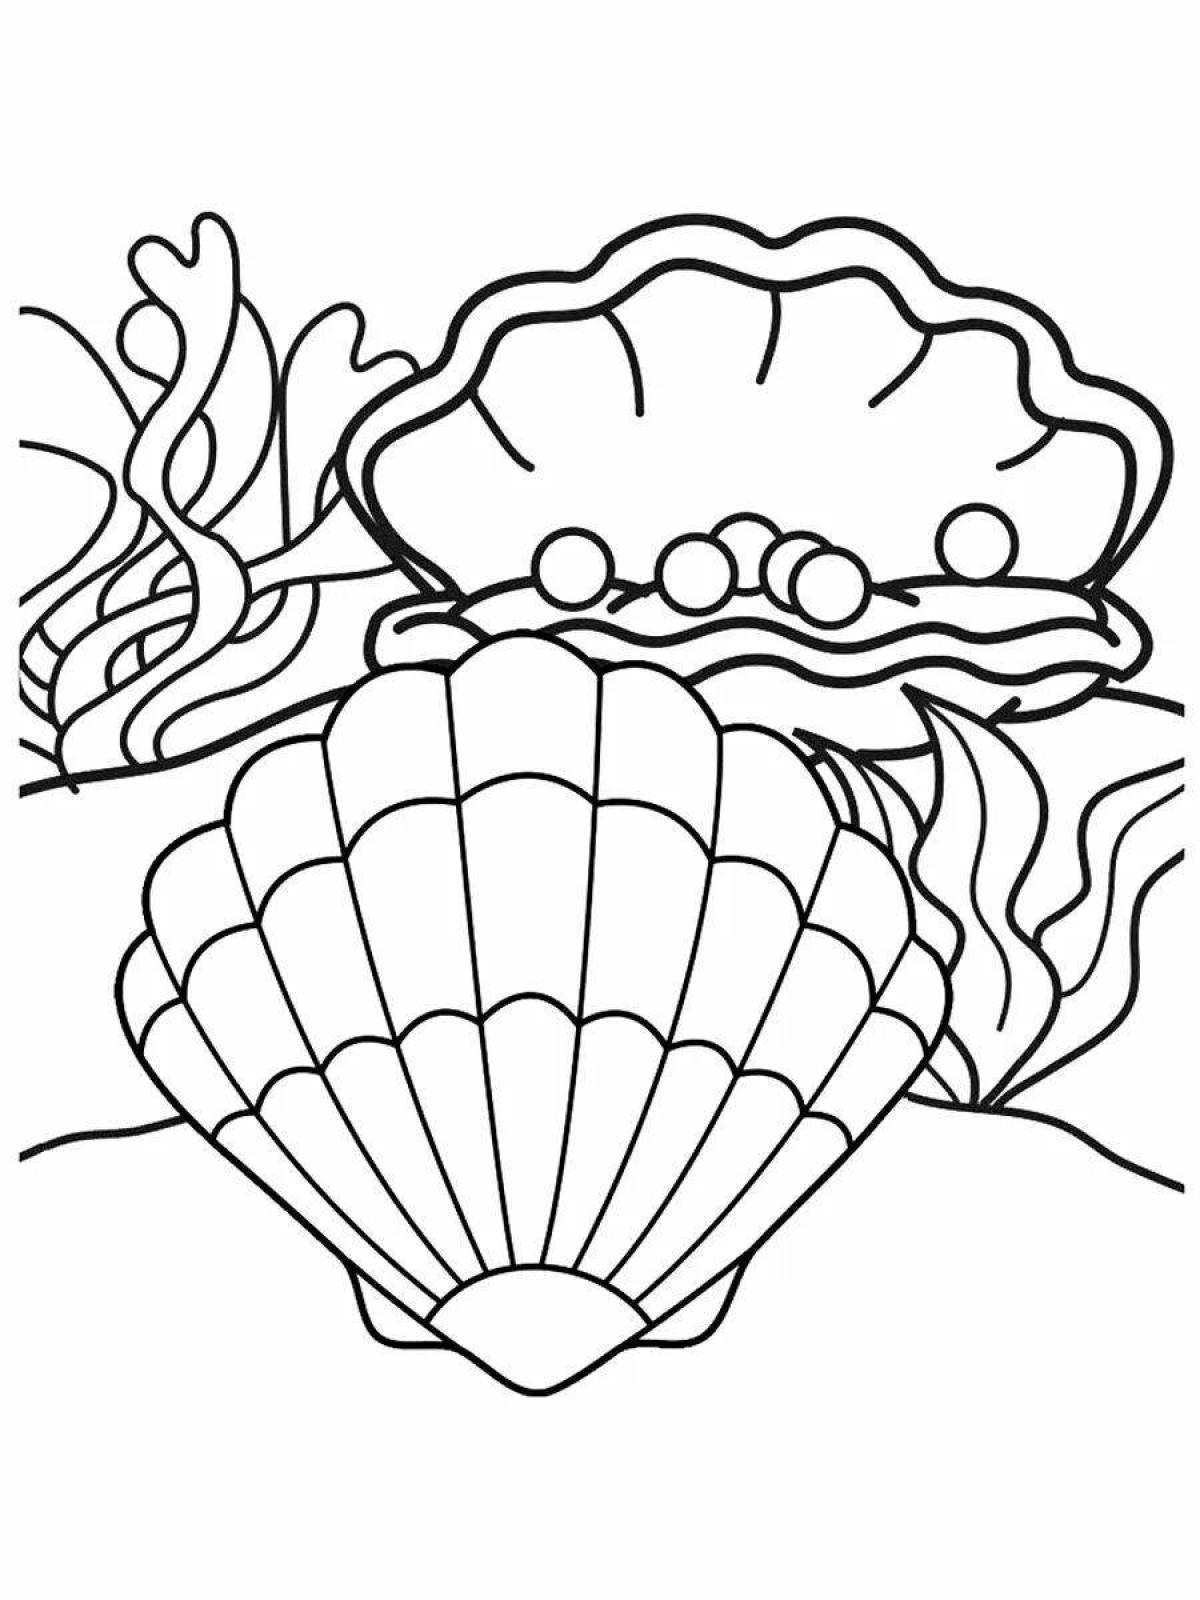 Exquisite shell coloring for kids